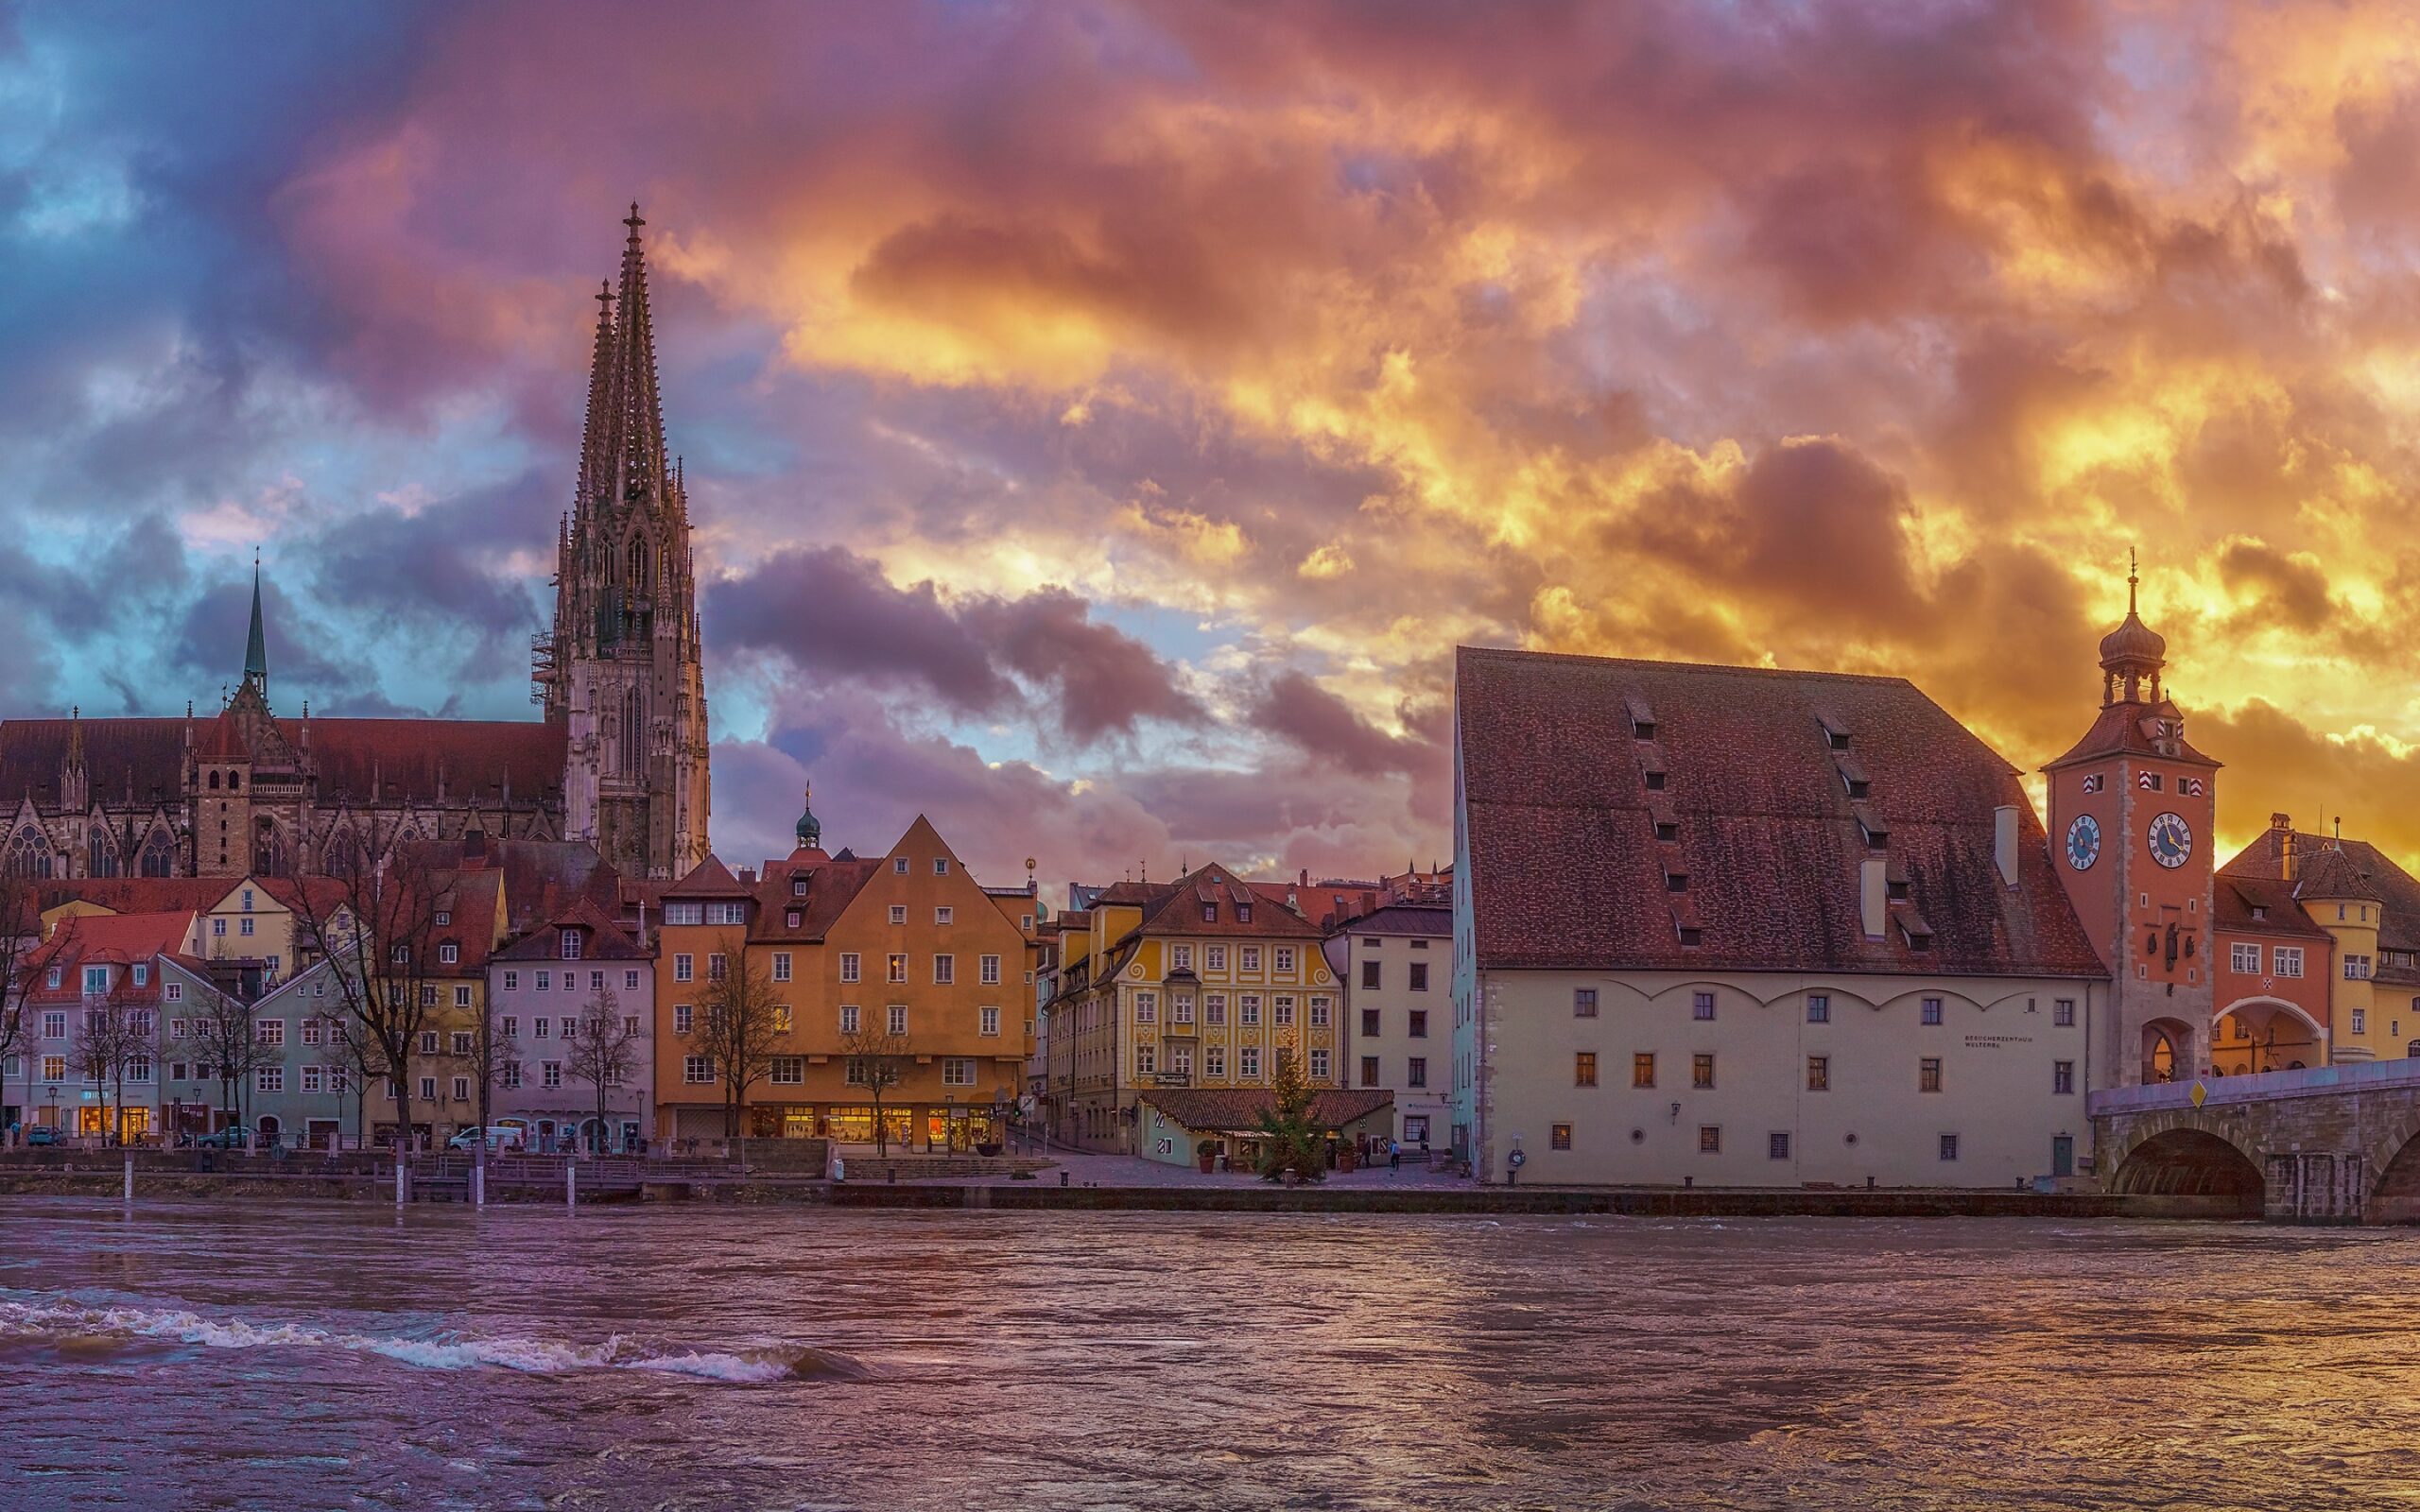 Download wallpapers Regensburg Cathedral, evening, sunset, cityscape